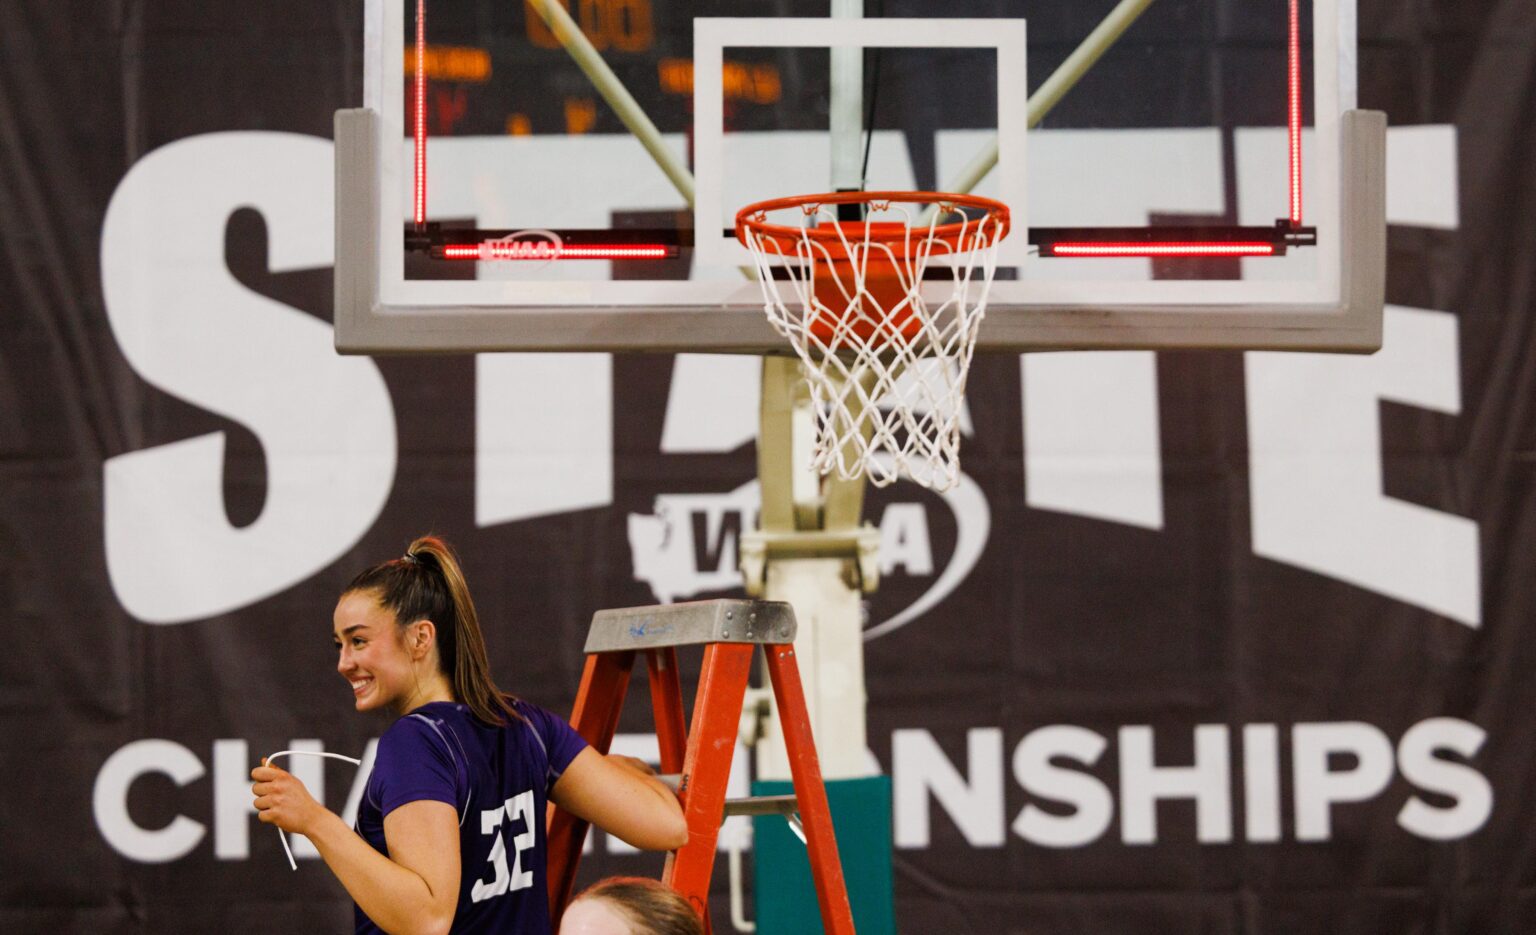 Nooksack Valley’s Taylor Lentz holds her piece of the net as she descends from the ladder.